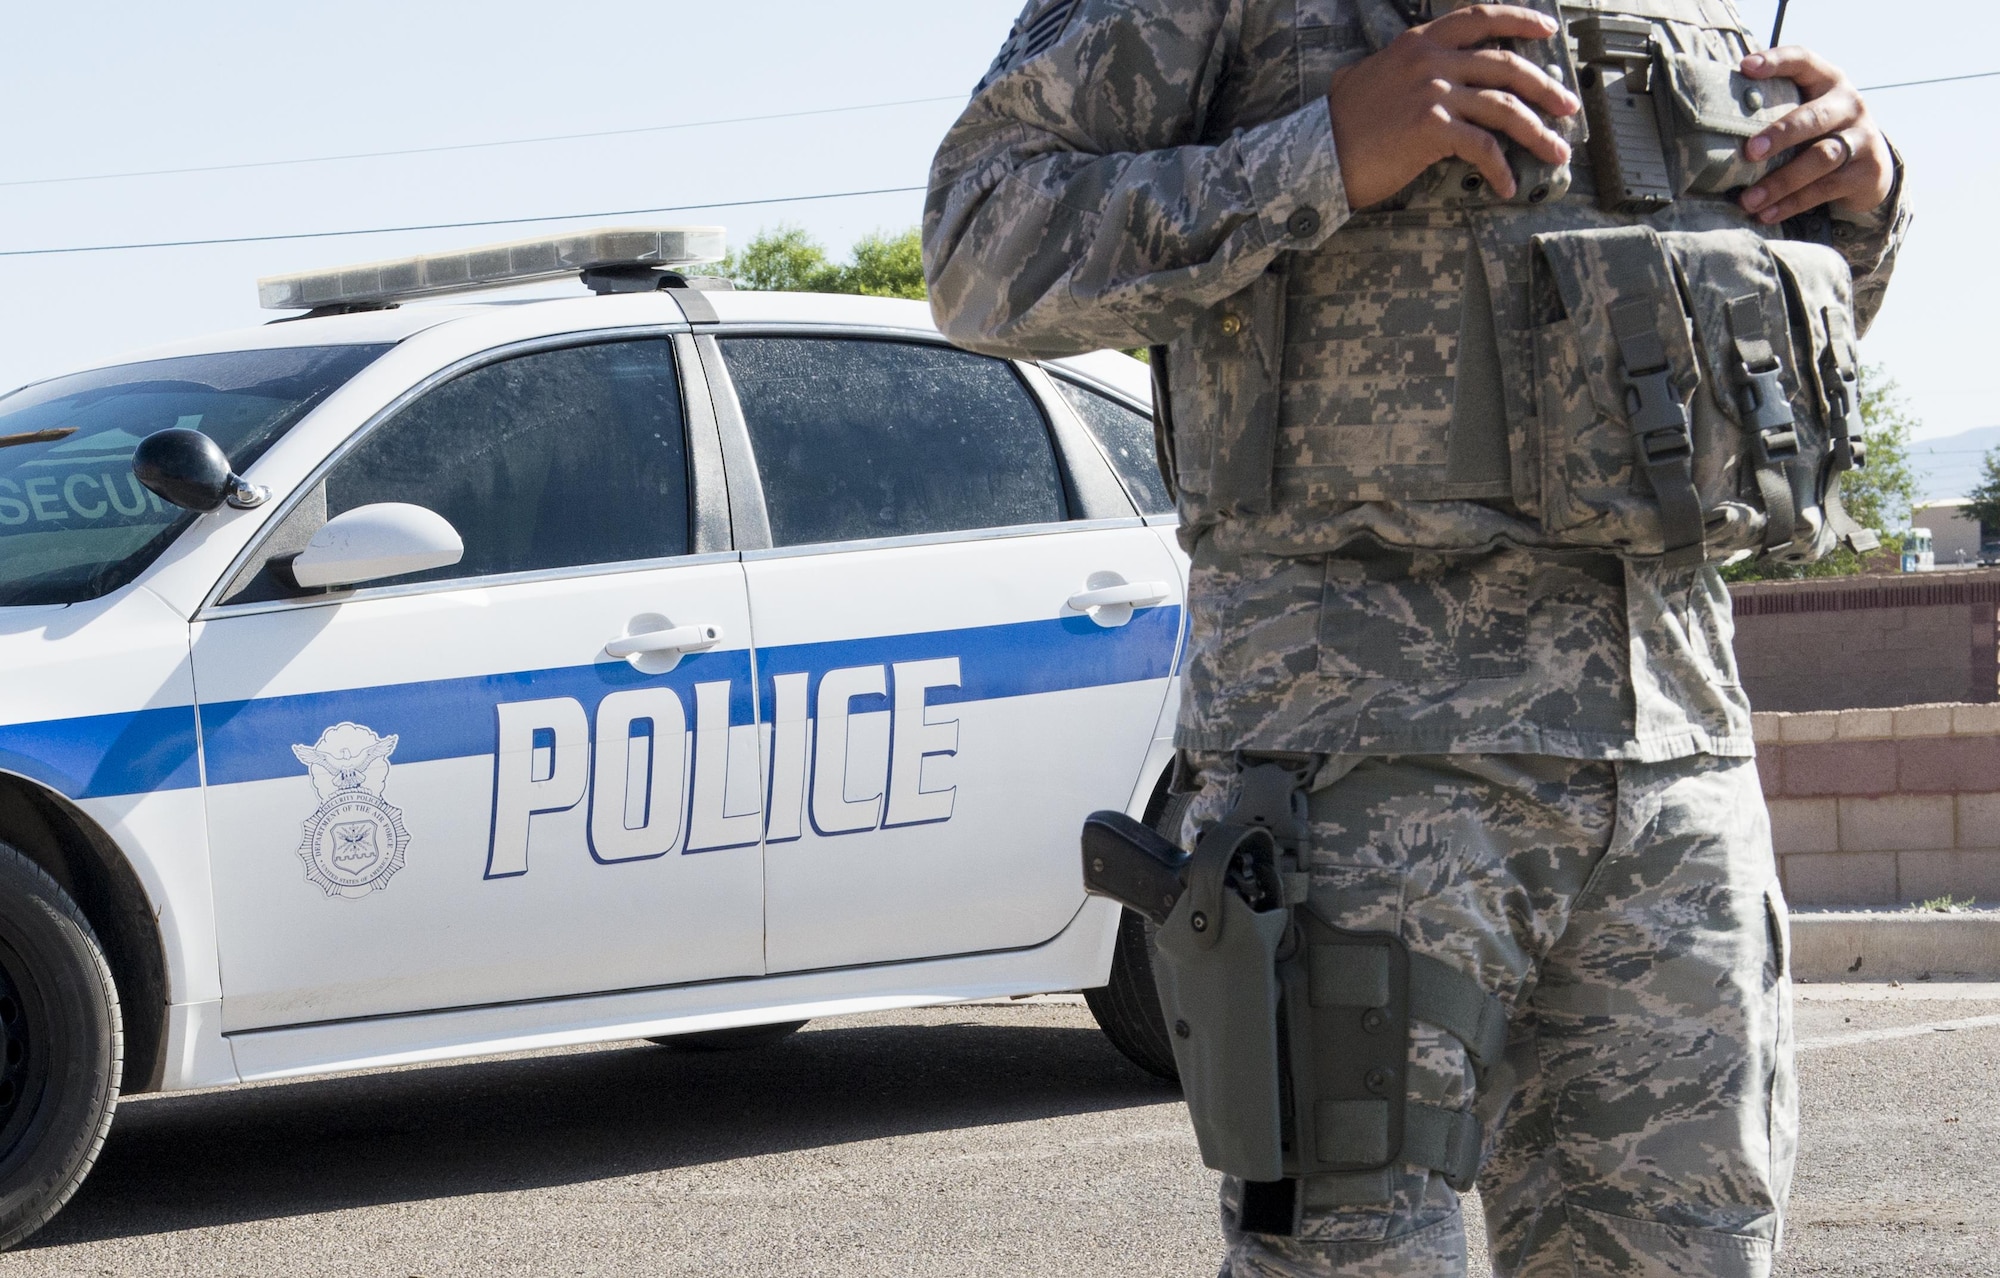 Staff Sgt. Agustin with the 49th Security Forces Squadron at Holloman Air Force Base, N.M., stands in front of his patrol car June 15. Since April 25, the 49th SFS has authorized selected personnel to be able to carry a concealed weapon while off duty and out of uniform. These changes are not the result of a direct threat, but address the everyday possibility of an active shooter incident occurring. (Last names are withheld due to operational constraints. U.S. Air Force photo by Airman 1st Class Randahl J. Jenson)    